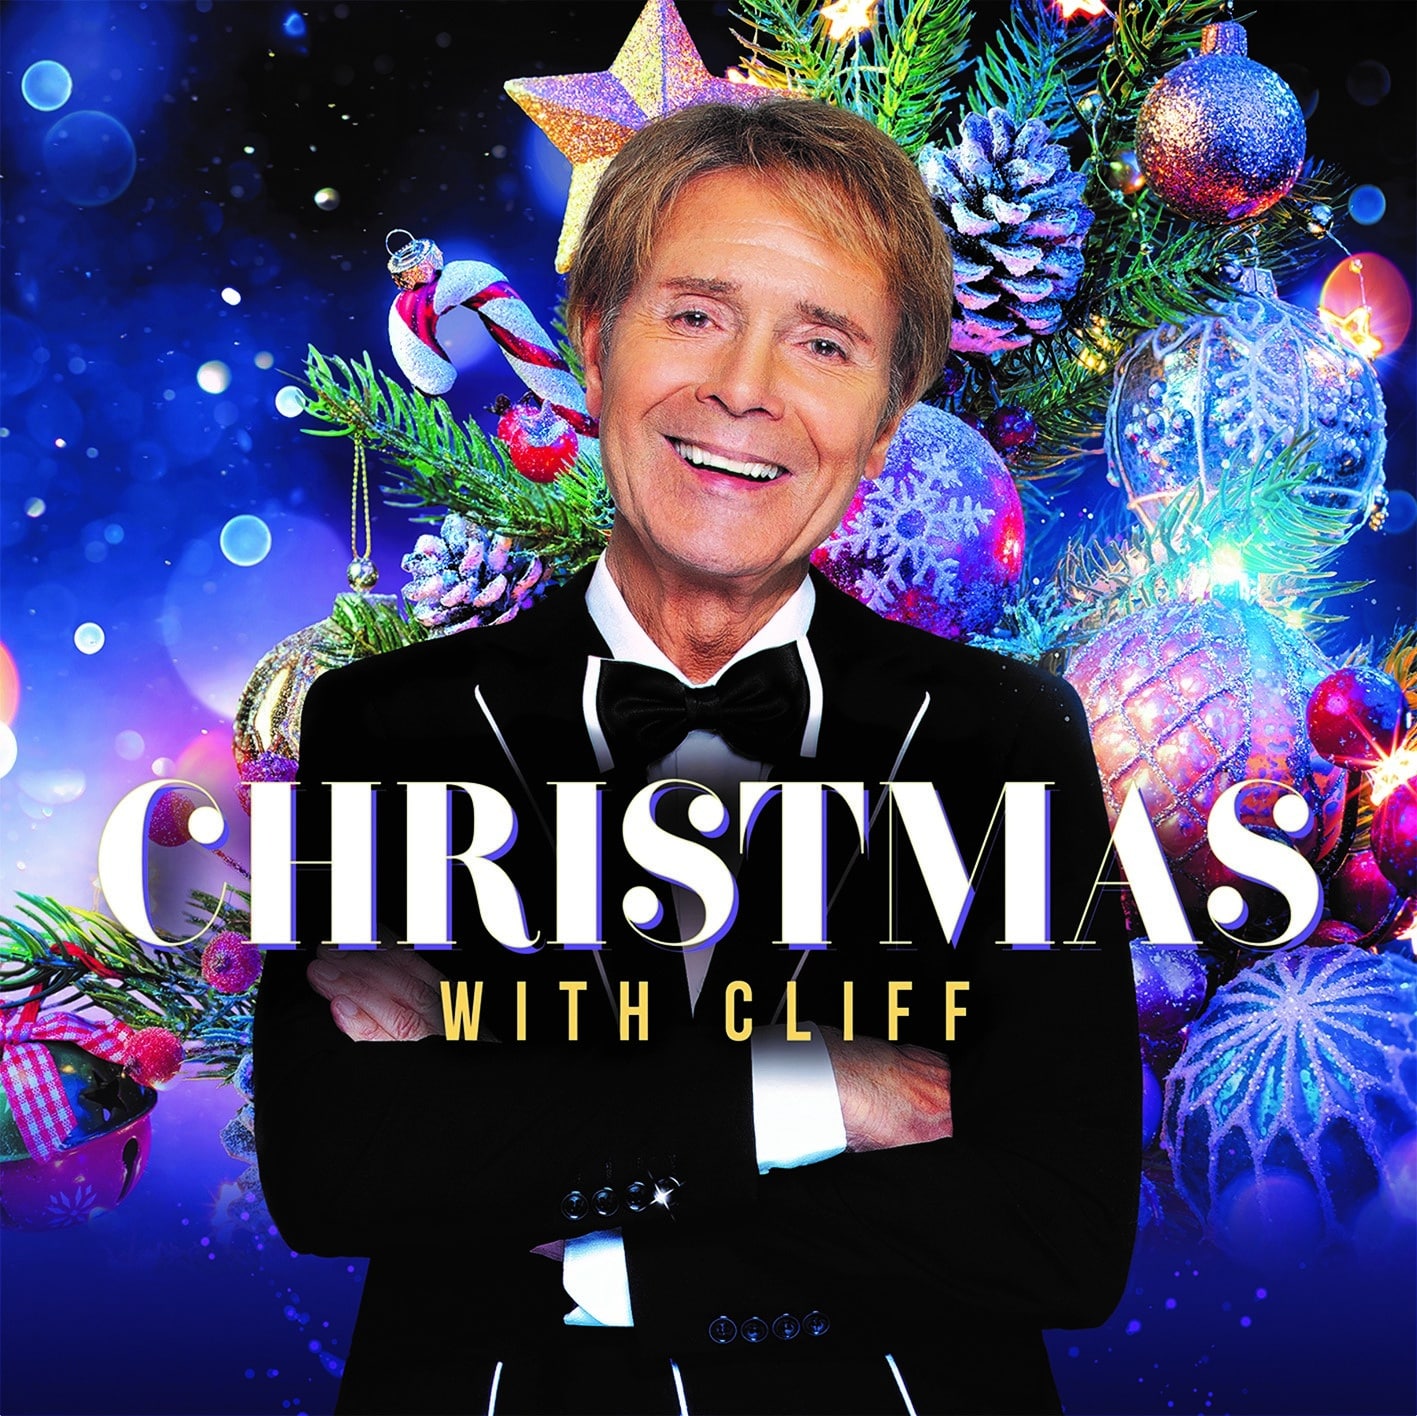 CLIFF RICHARD - CHRISTMAS WITH CLIFF (RED VINYL)